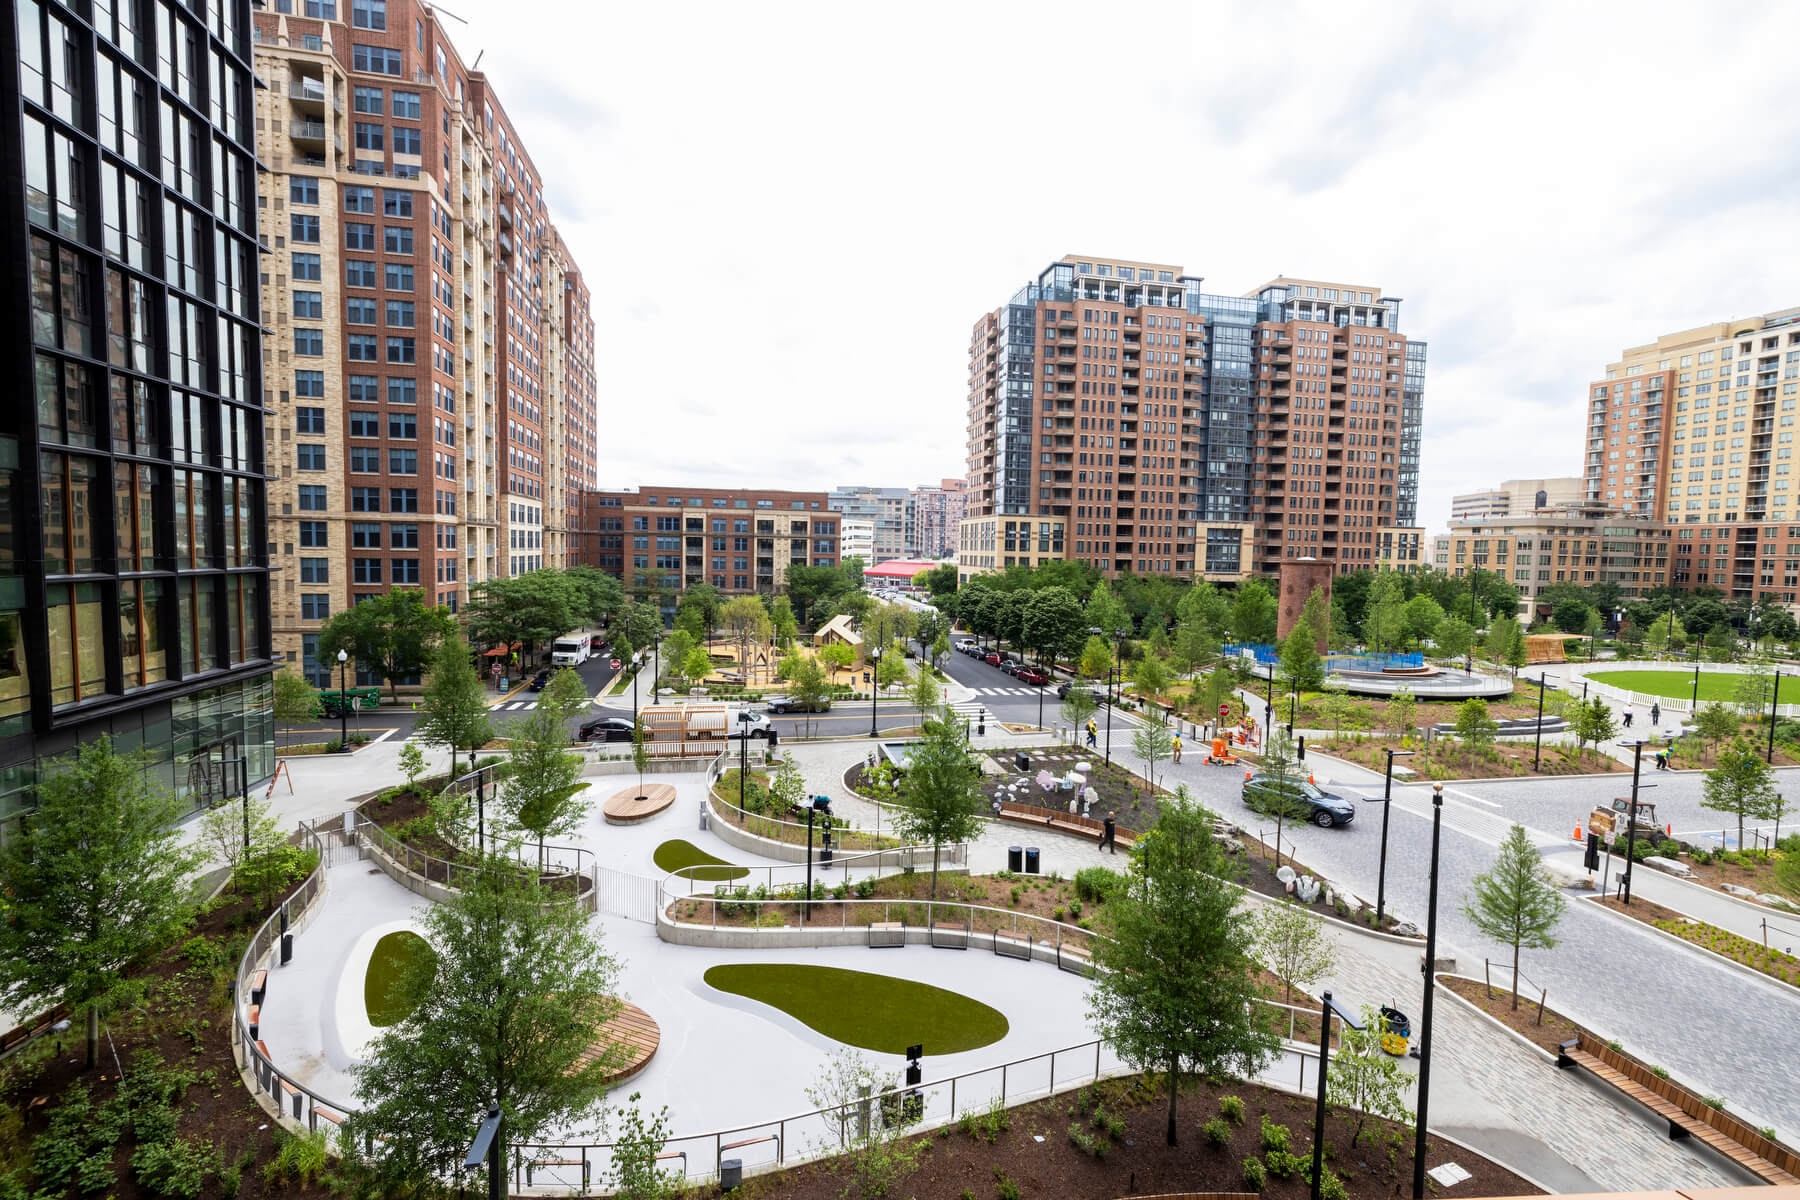 An image of the outside of Amazon HQ2. You can see greenery and several sidewalks that are curved